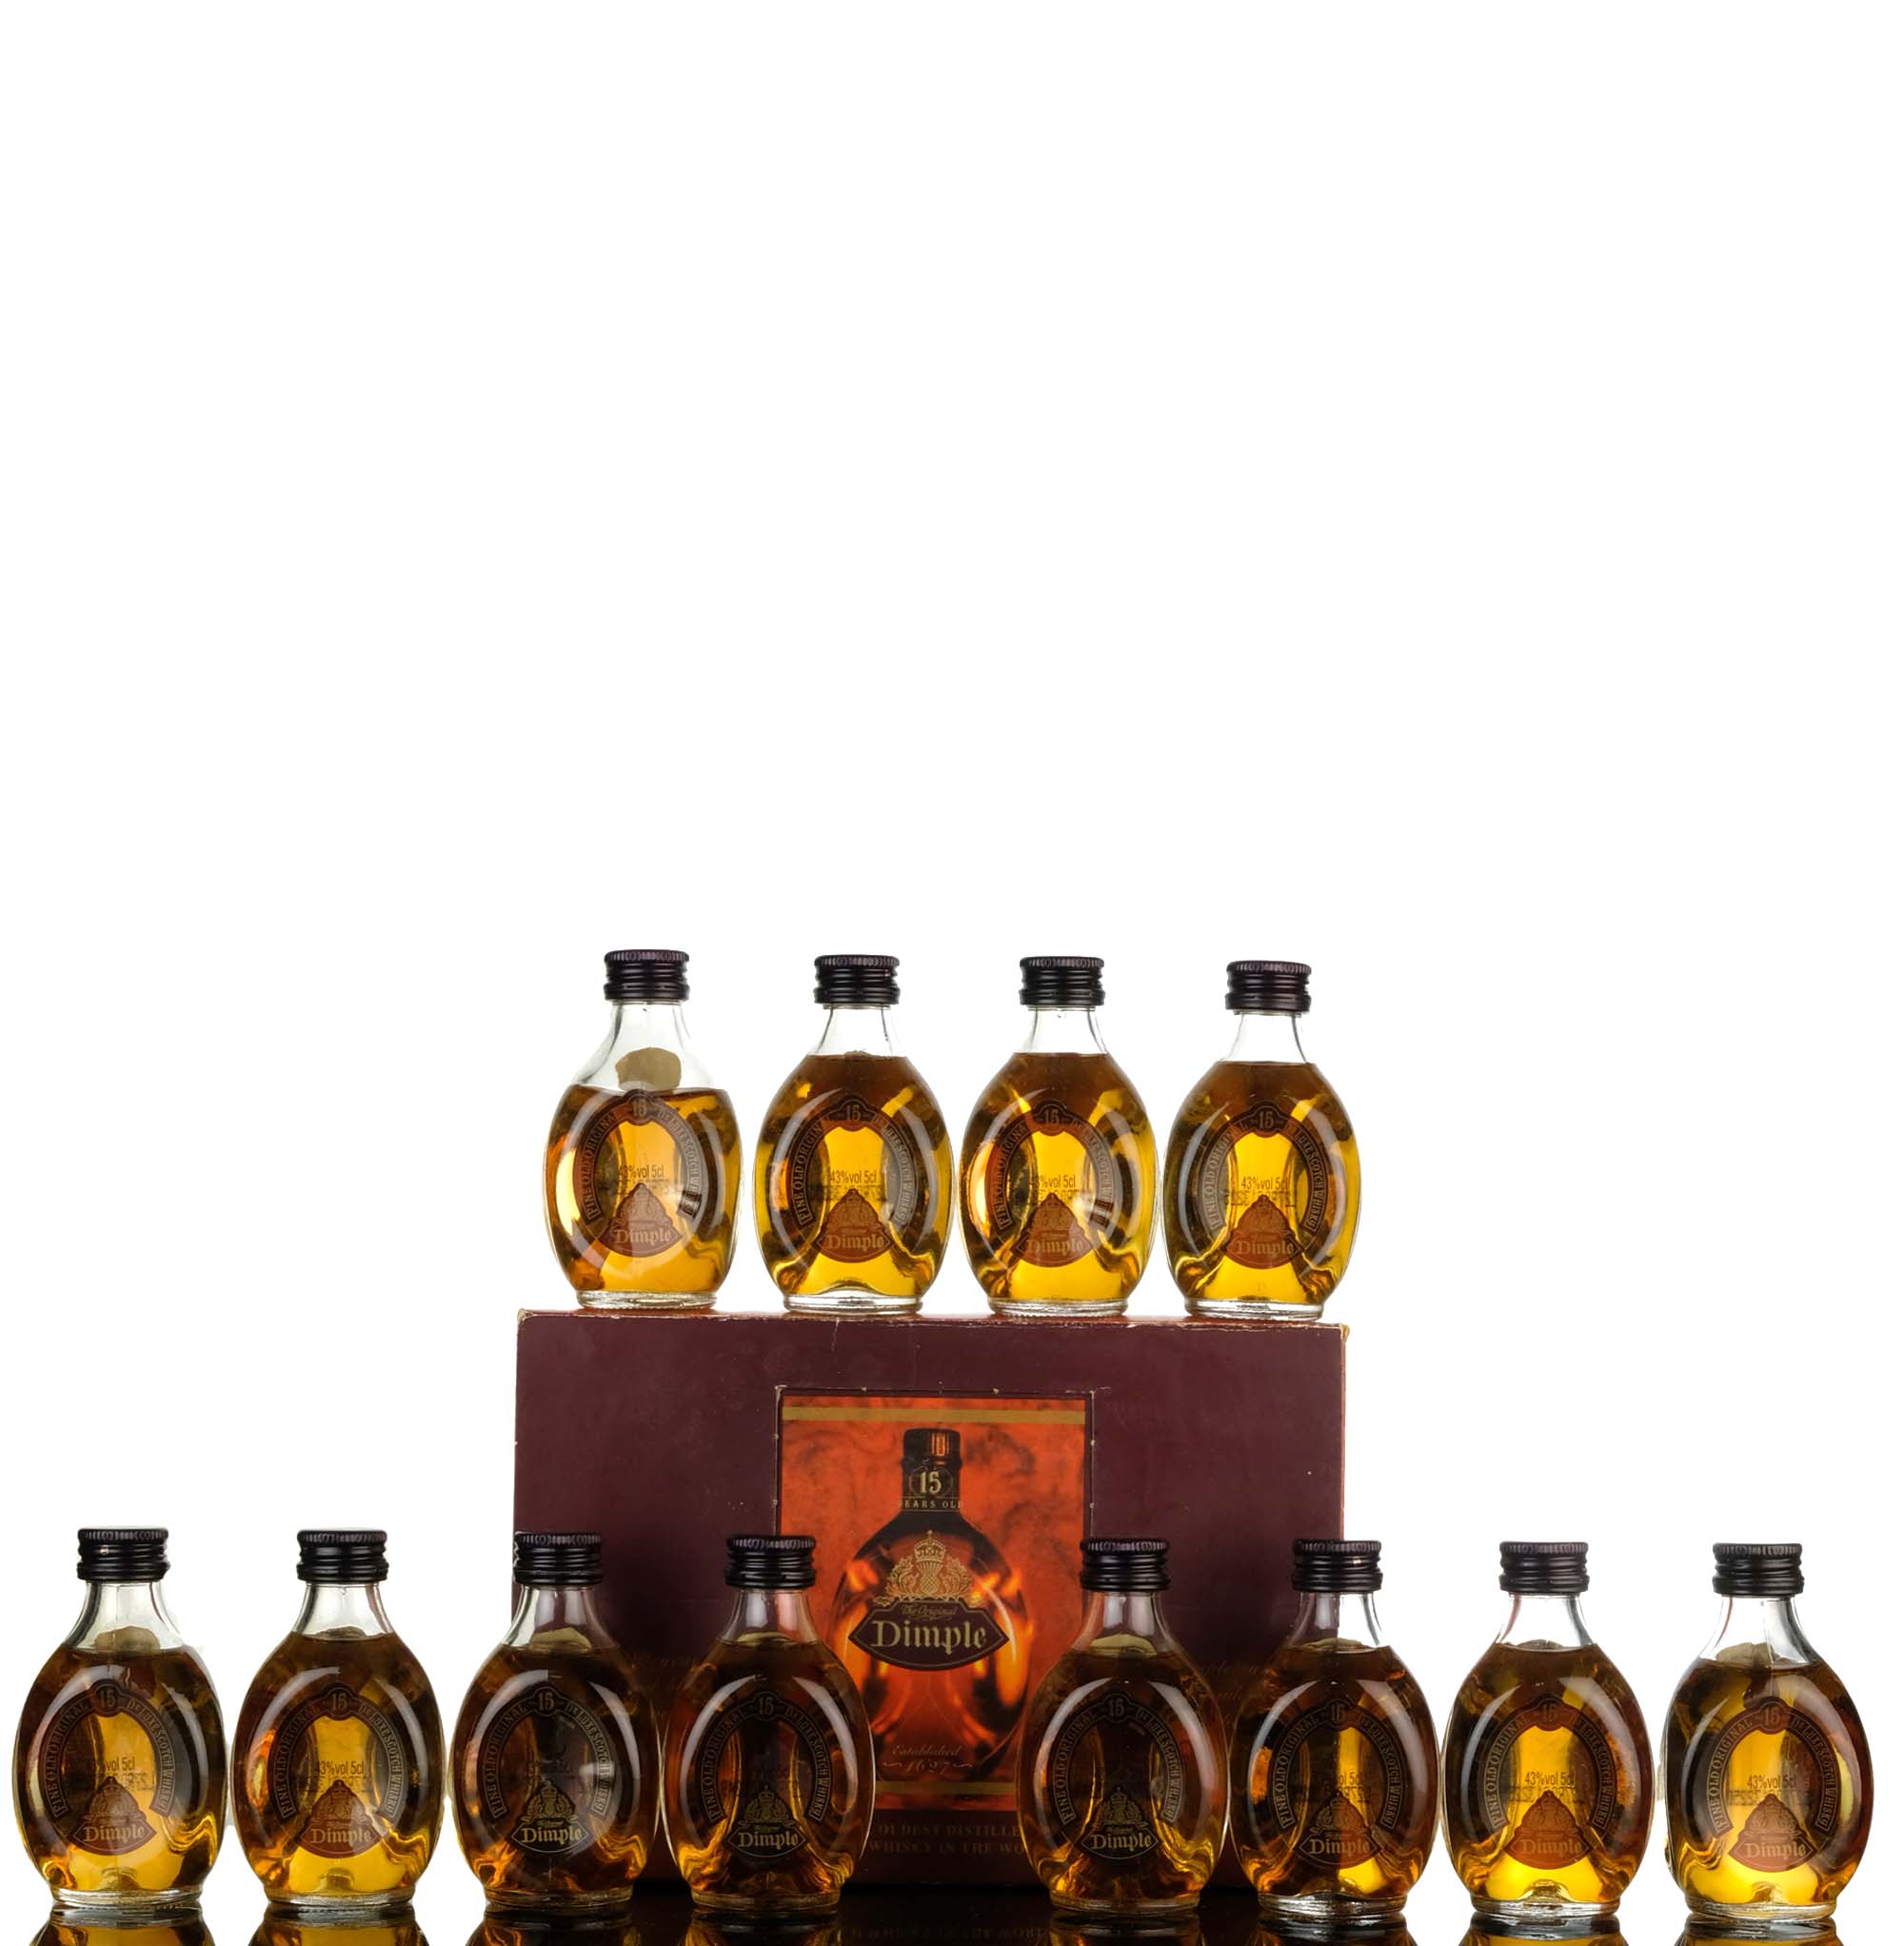 Dimple 15 Year Old - Fine Old Original - 2000s - Full Case Of Miniatures